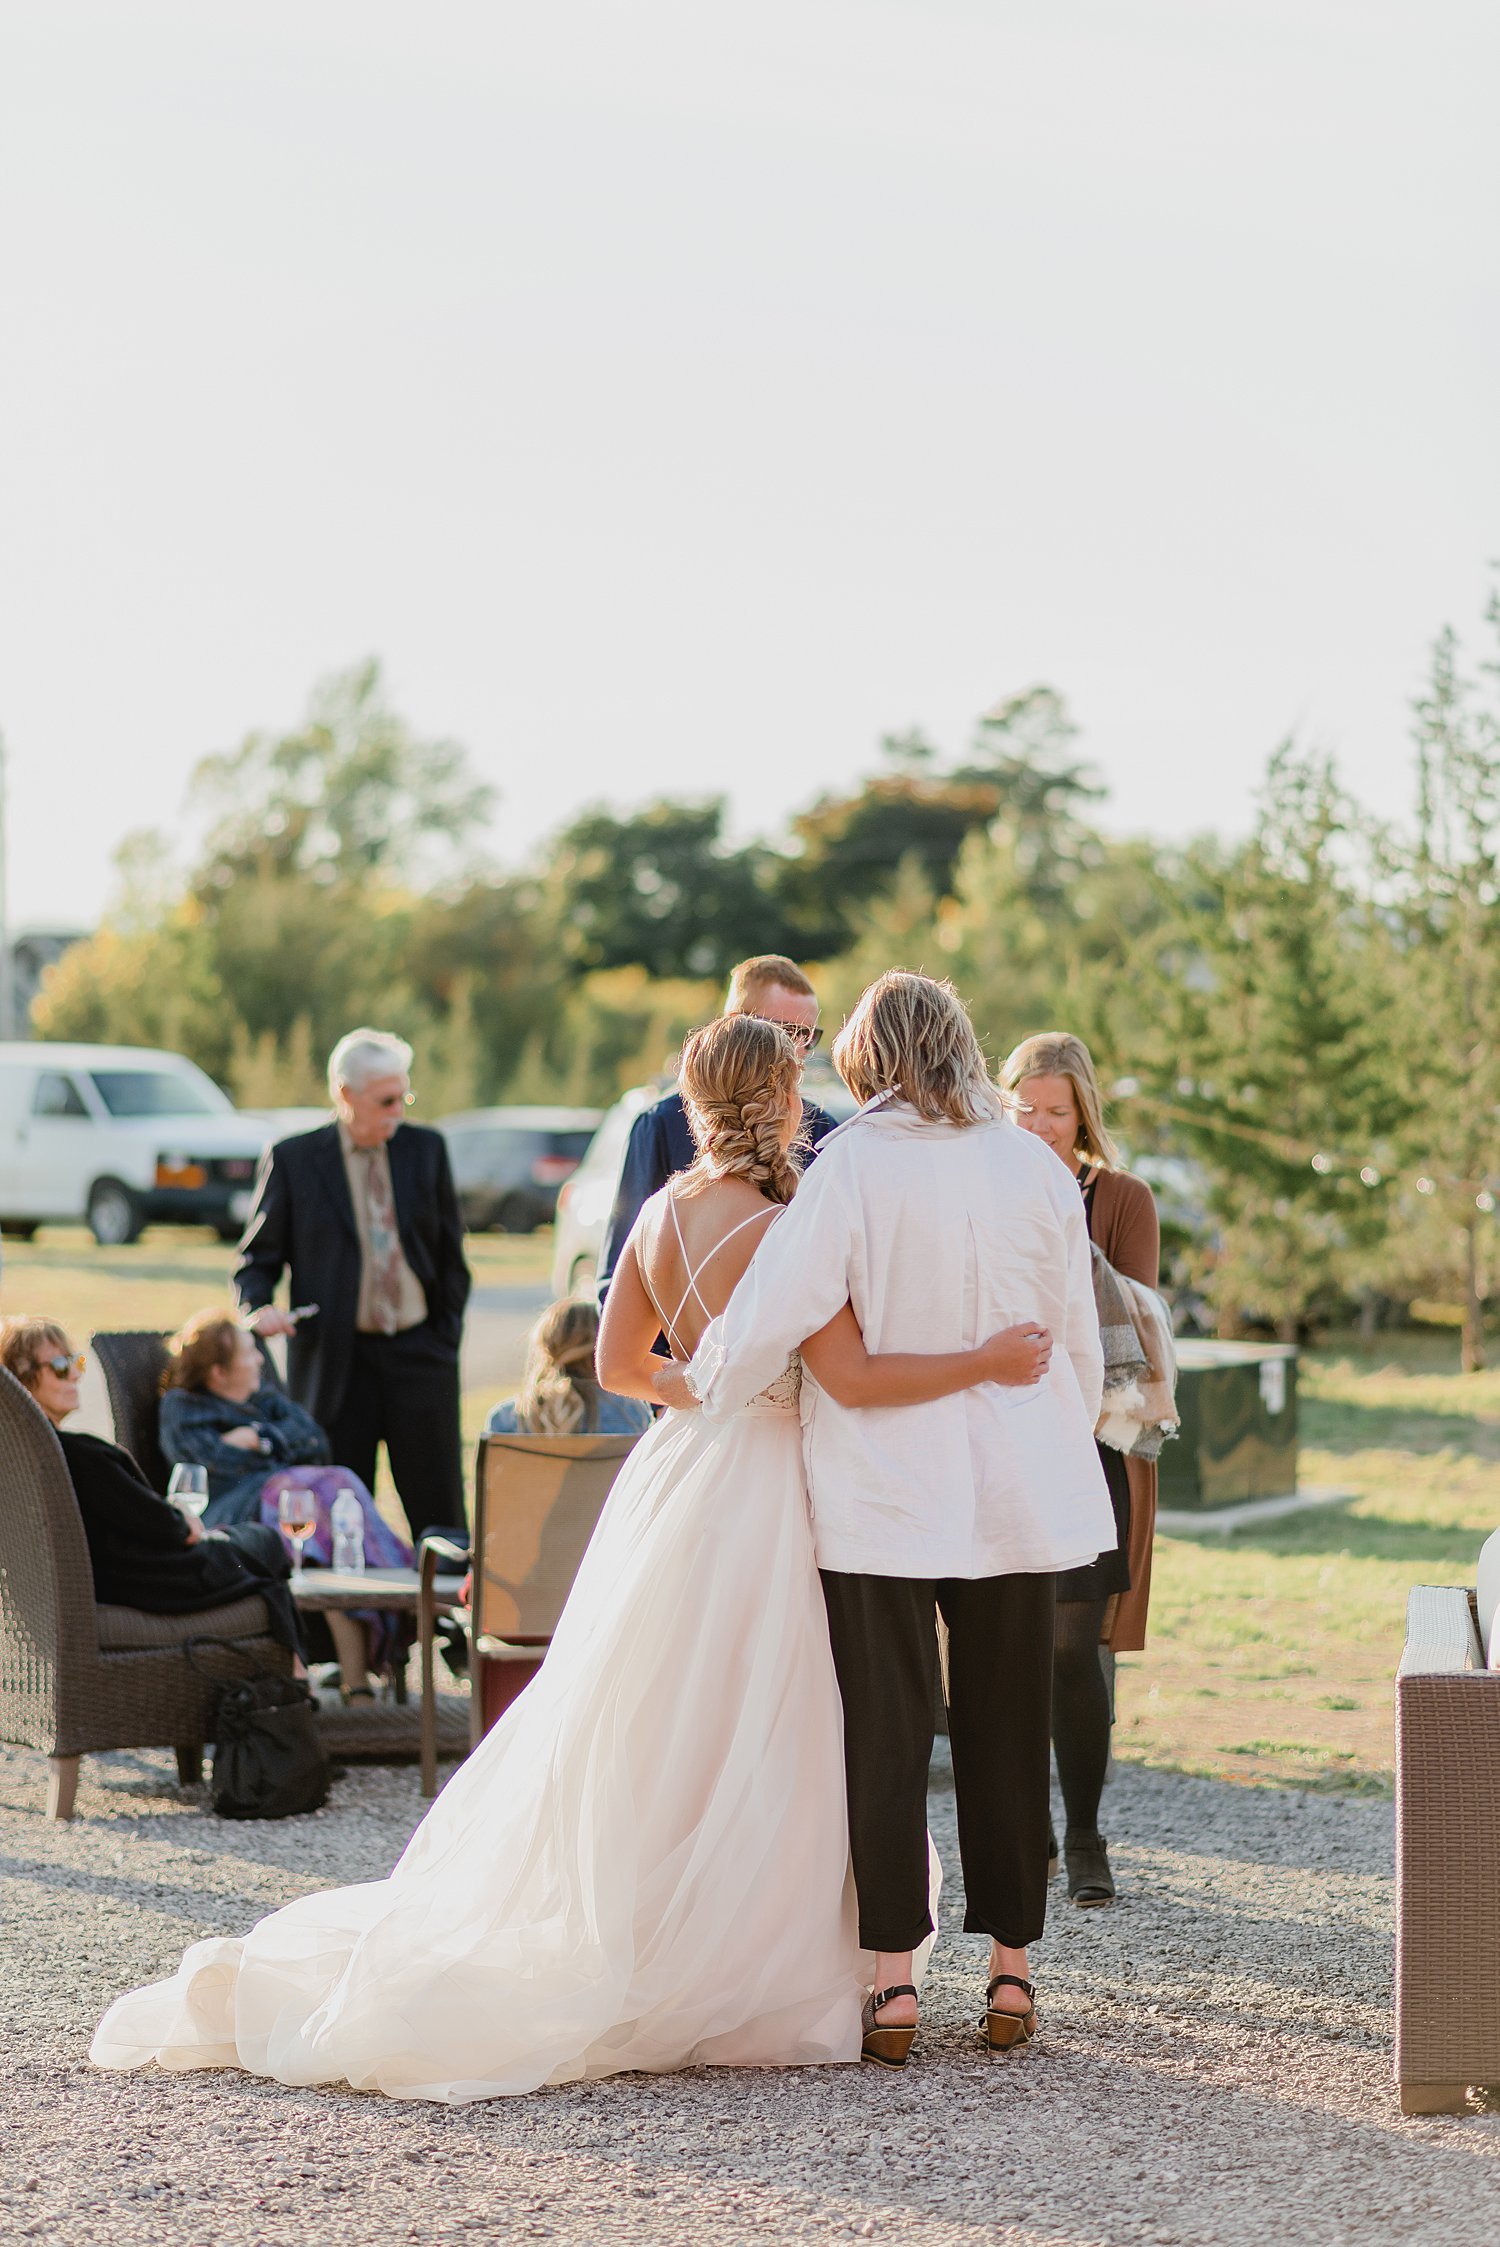 A Royal Canadian Mountie's Intimate Summer Wedding in Prince Edward County | Prince Edward County Wedding Photographer | Holly McMurter Photographs_0073.jpg